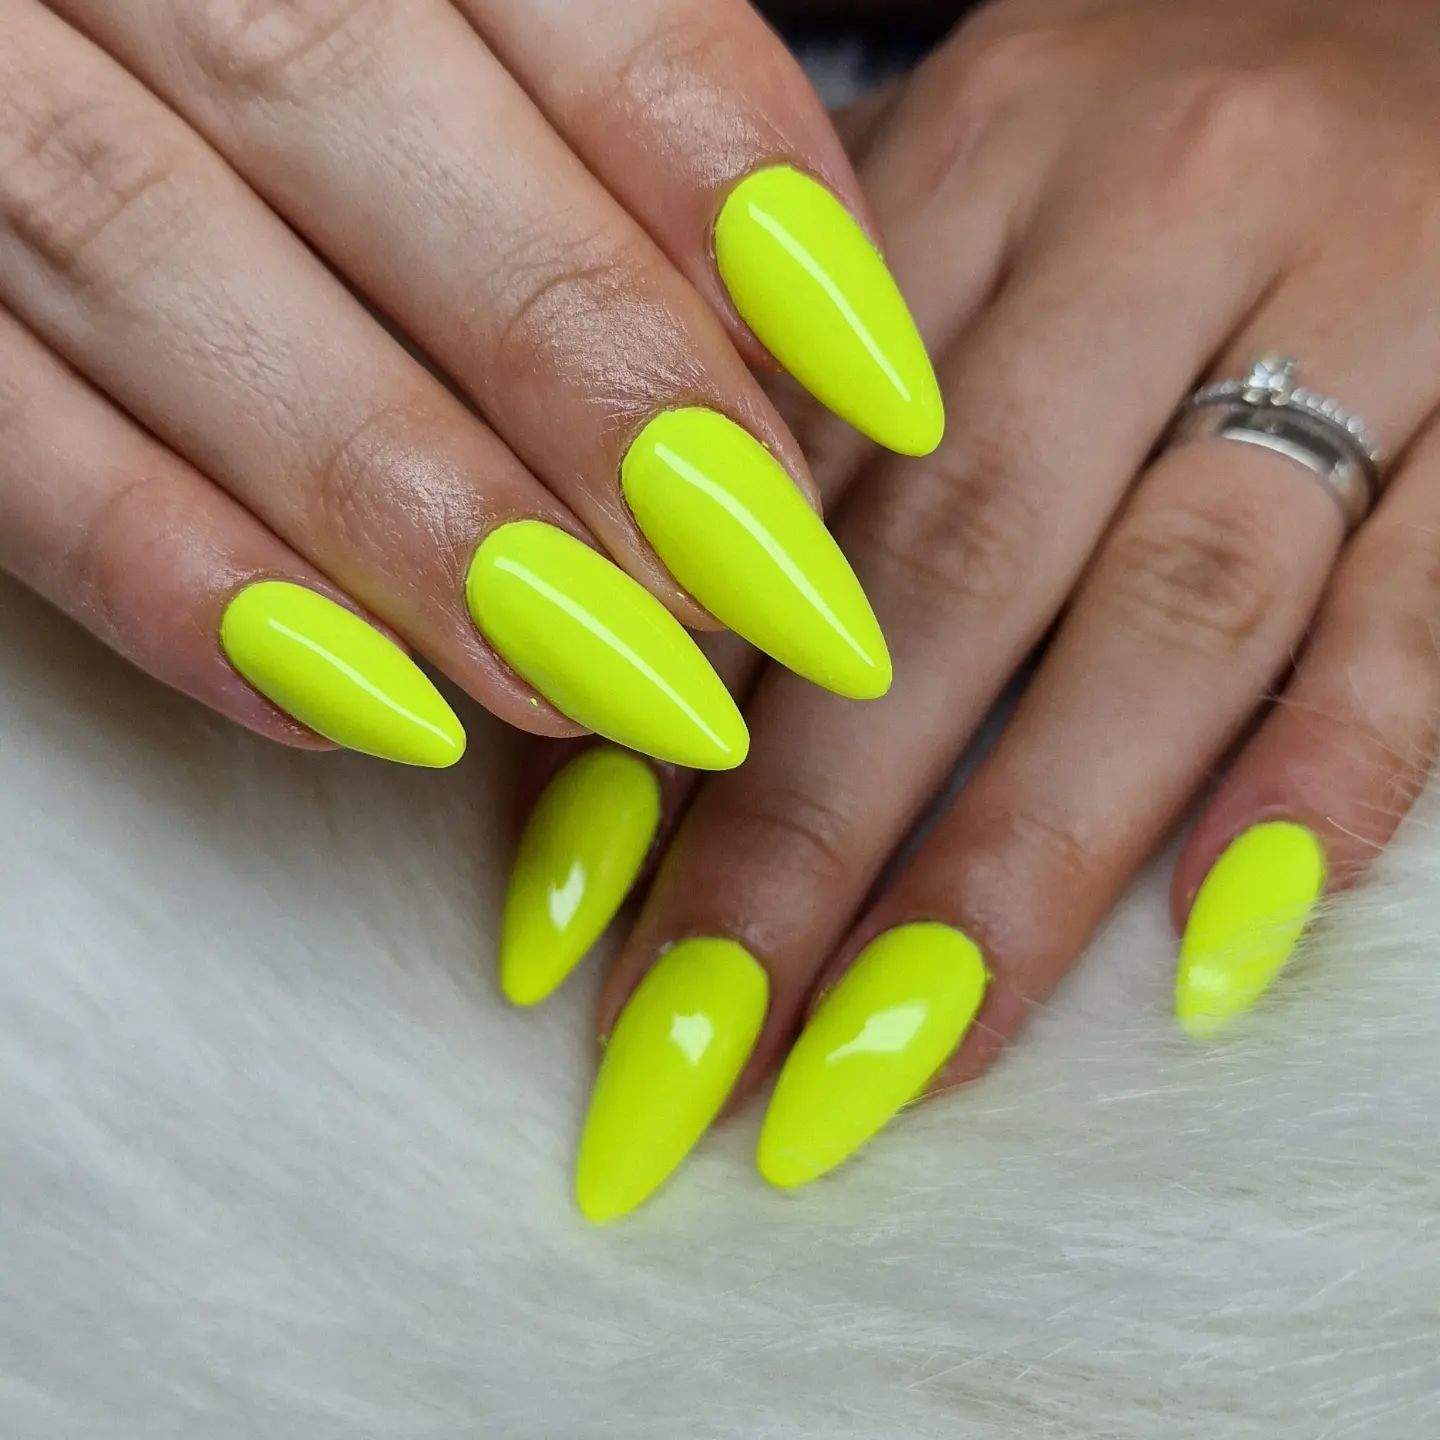 A shade of color between yellow and green is ready to make you look like a star in summer! Try it out if you want to shine.